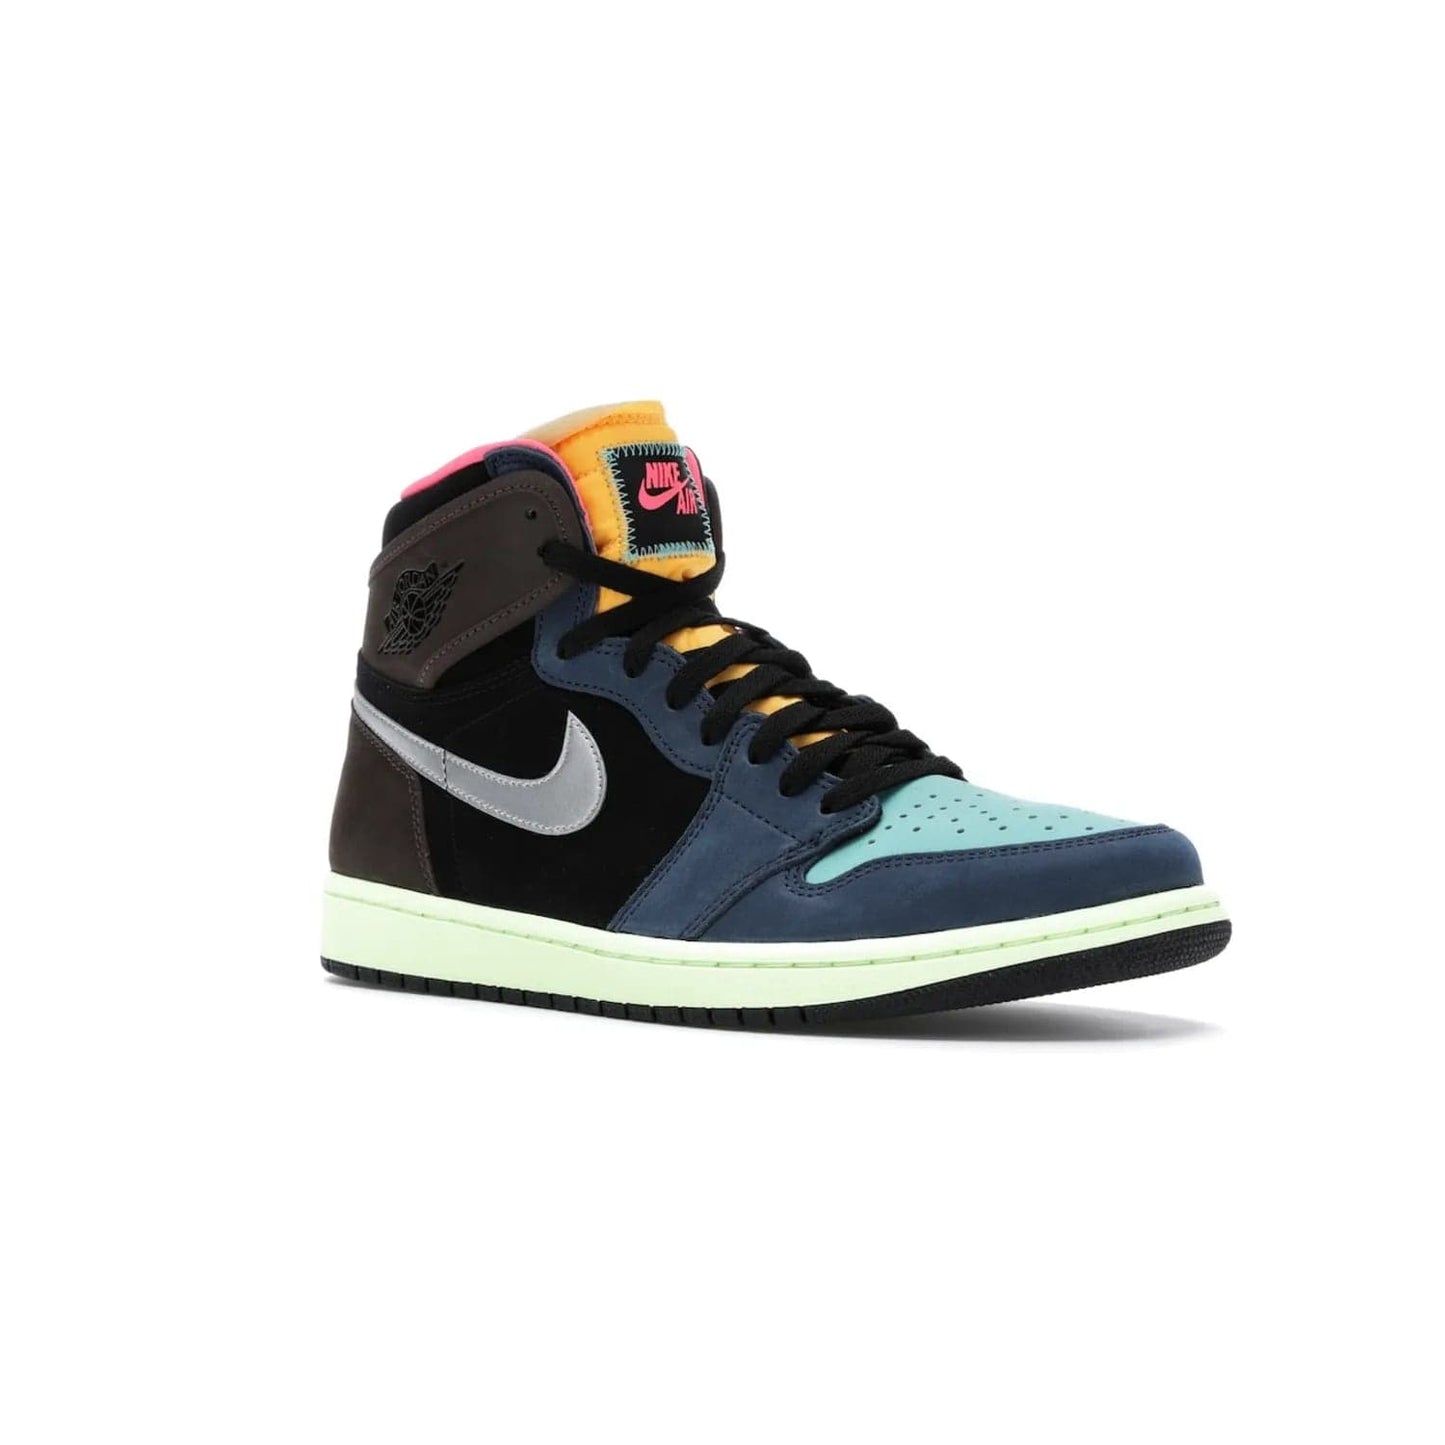 Jordan 1 Retro High Tokyo Bio Hack - Image 5 - Only at www.BallersClubKickz.com - Step up your sneaker game with the Air Jordan 1 Retro High Tokyo Bio Hack! Unique design featuring multiple materials and eye-catching colors. Metallic leather Swoosh and light green midsole for a stunning look. Available now for just $170.